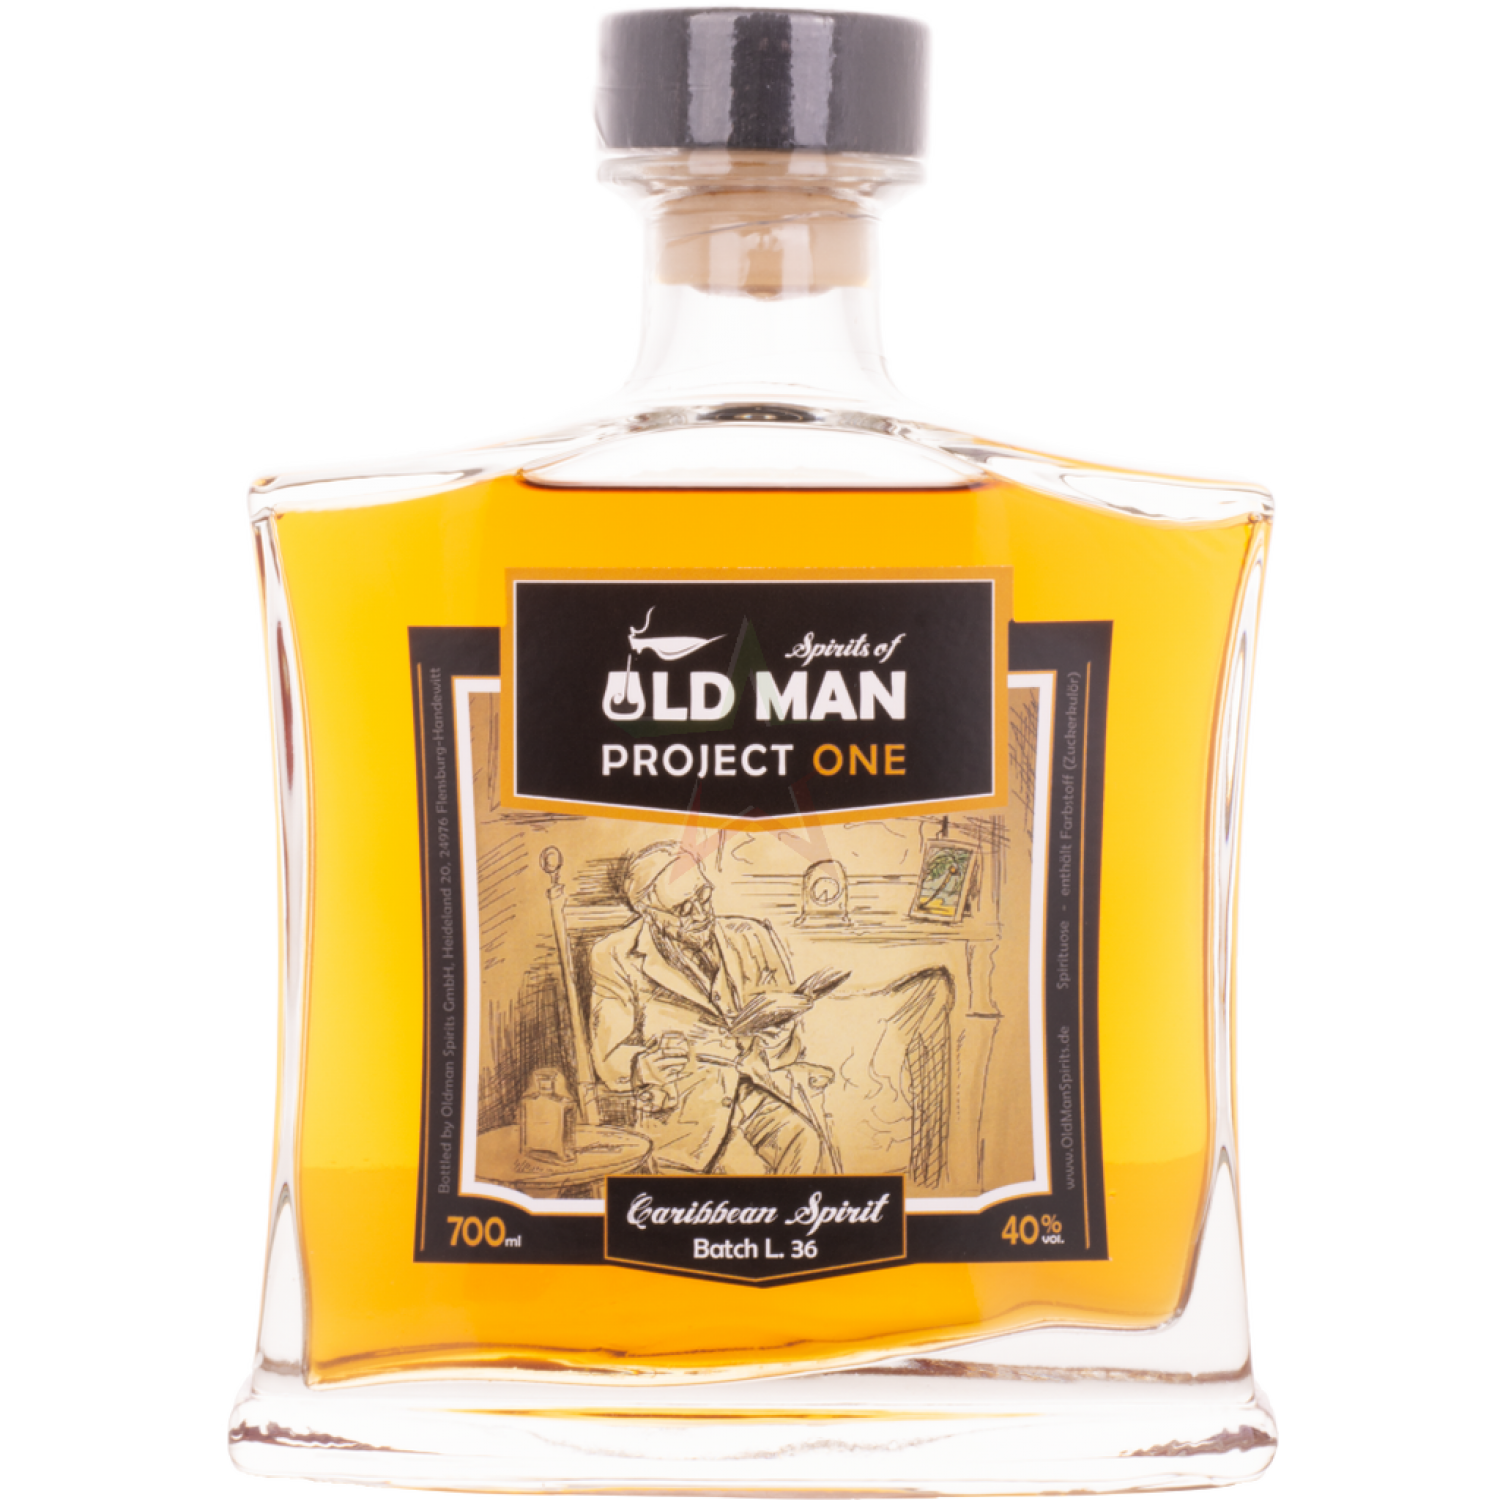 Old Man Rum Project One Caribbean Rum 40 00 0 70 Liter H H Shop